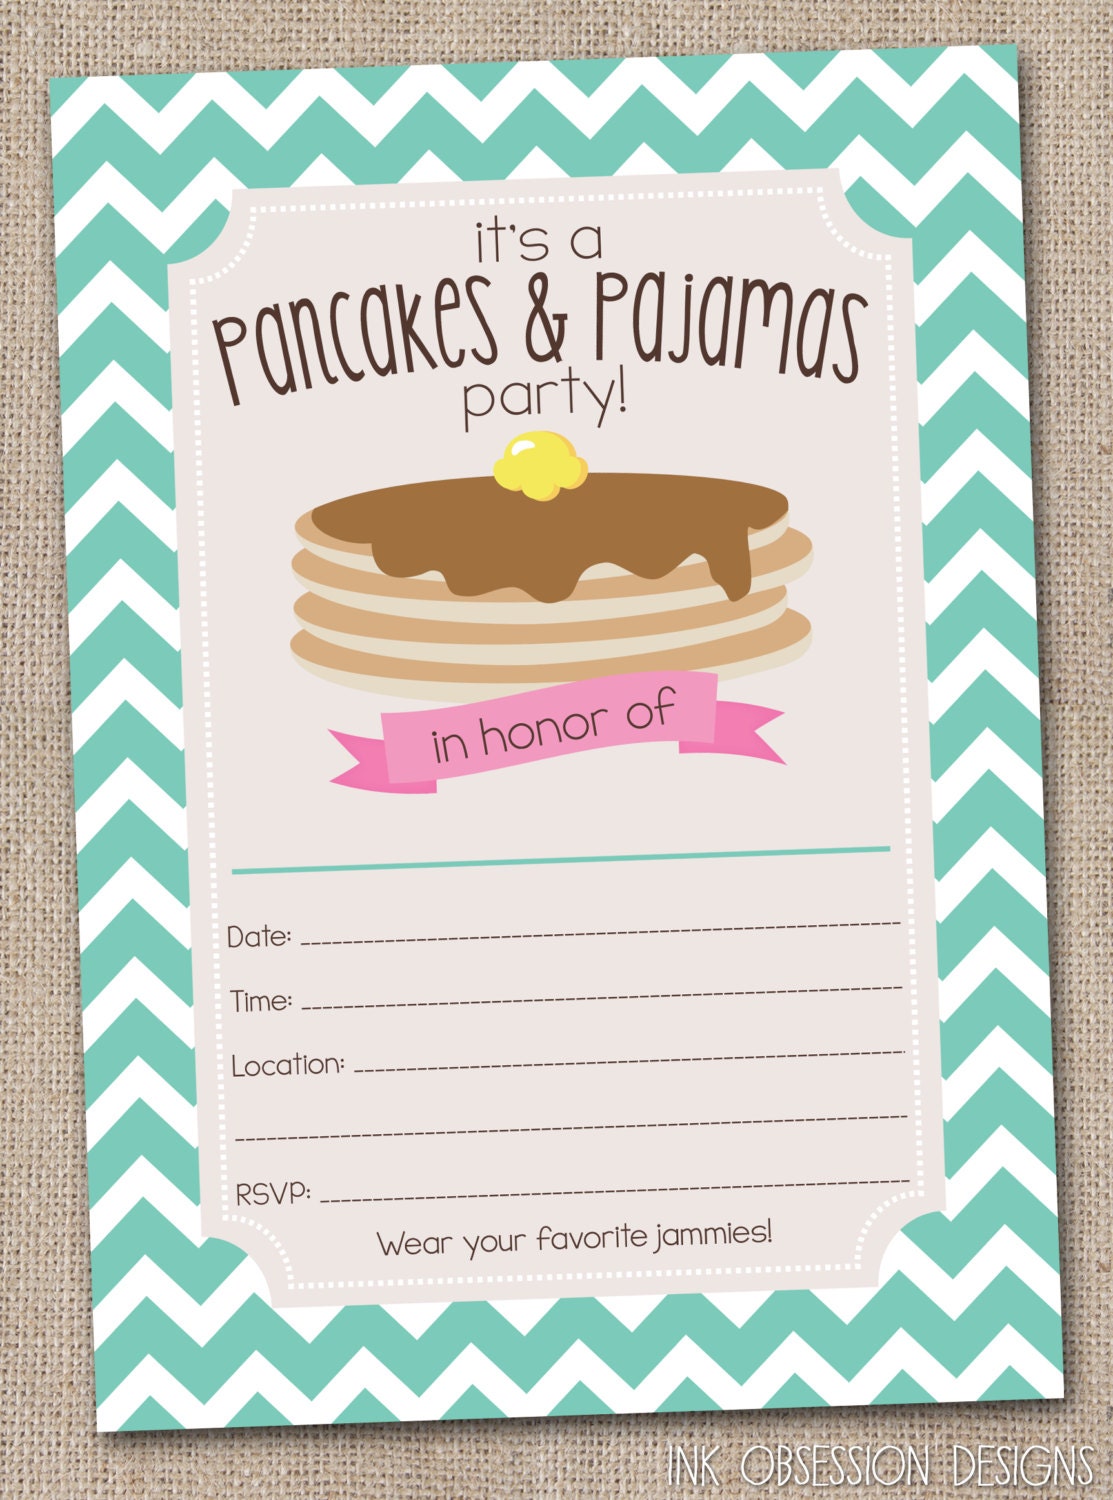 pancakes-pajamas-party-invitations-by-inkobsessiondesigns